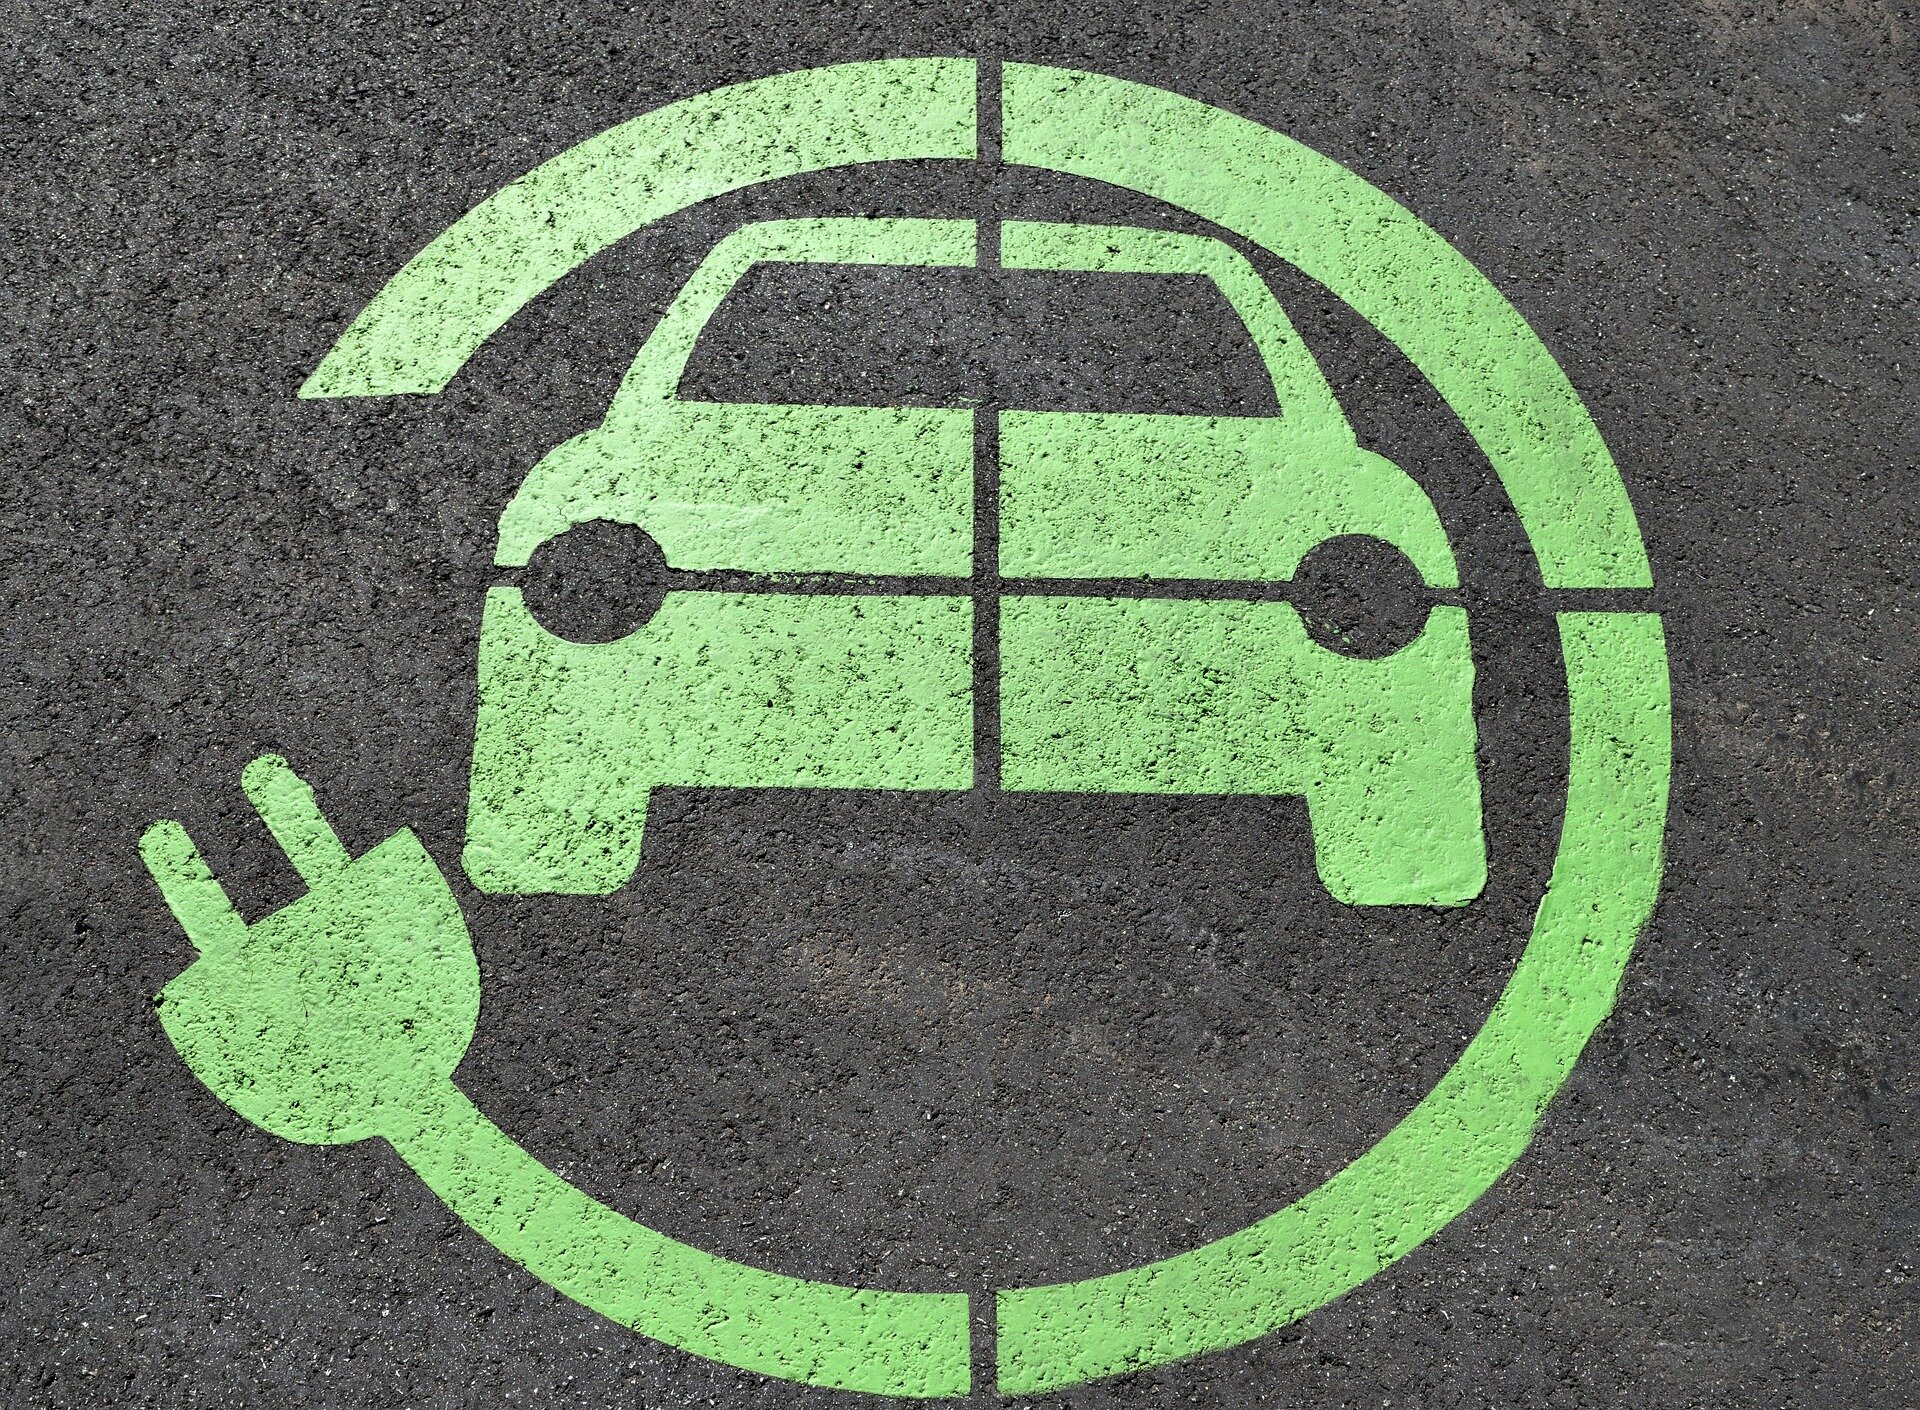 Electric vehicles: If the UK is serious about being a major player, here’s what needs to happen